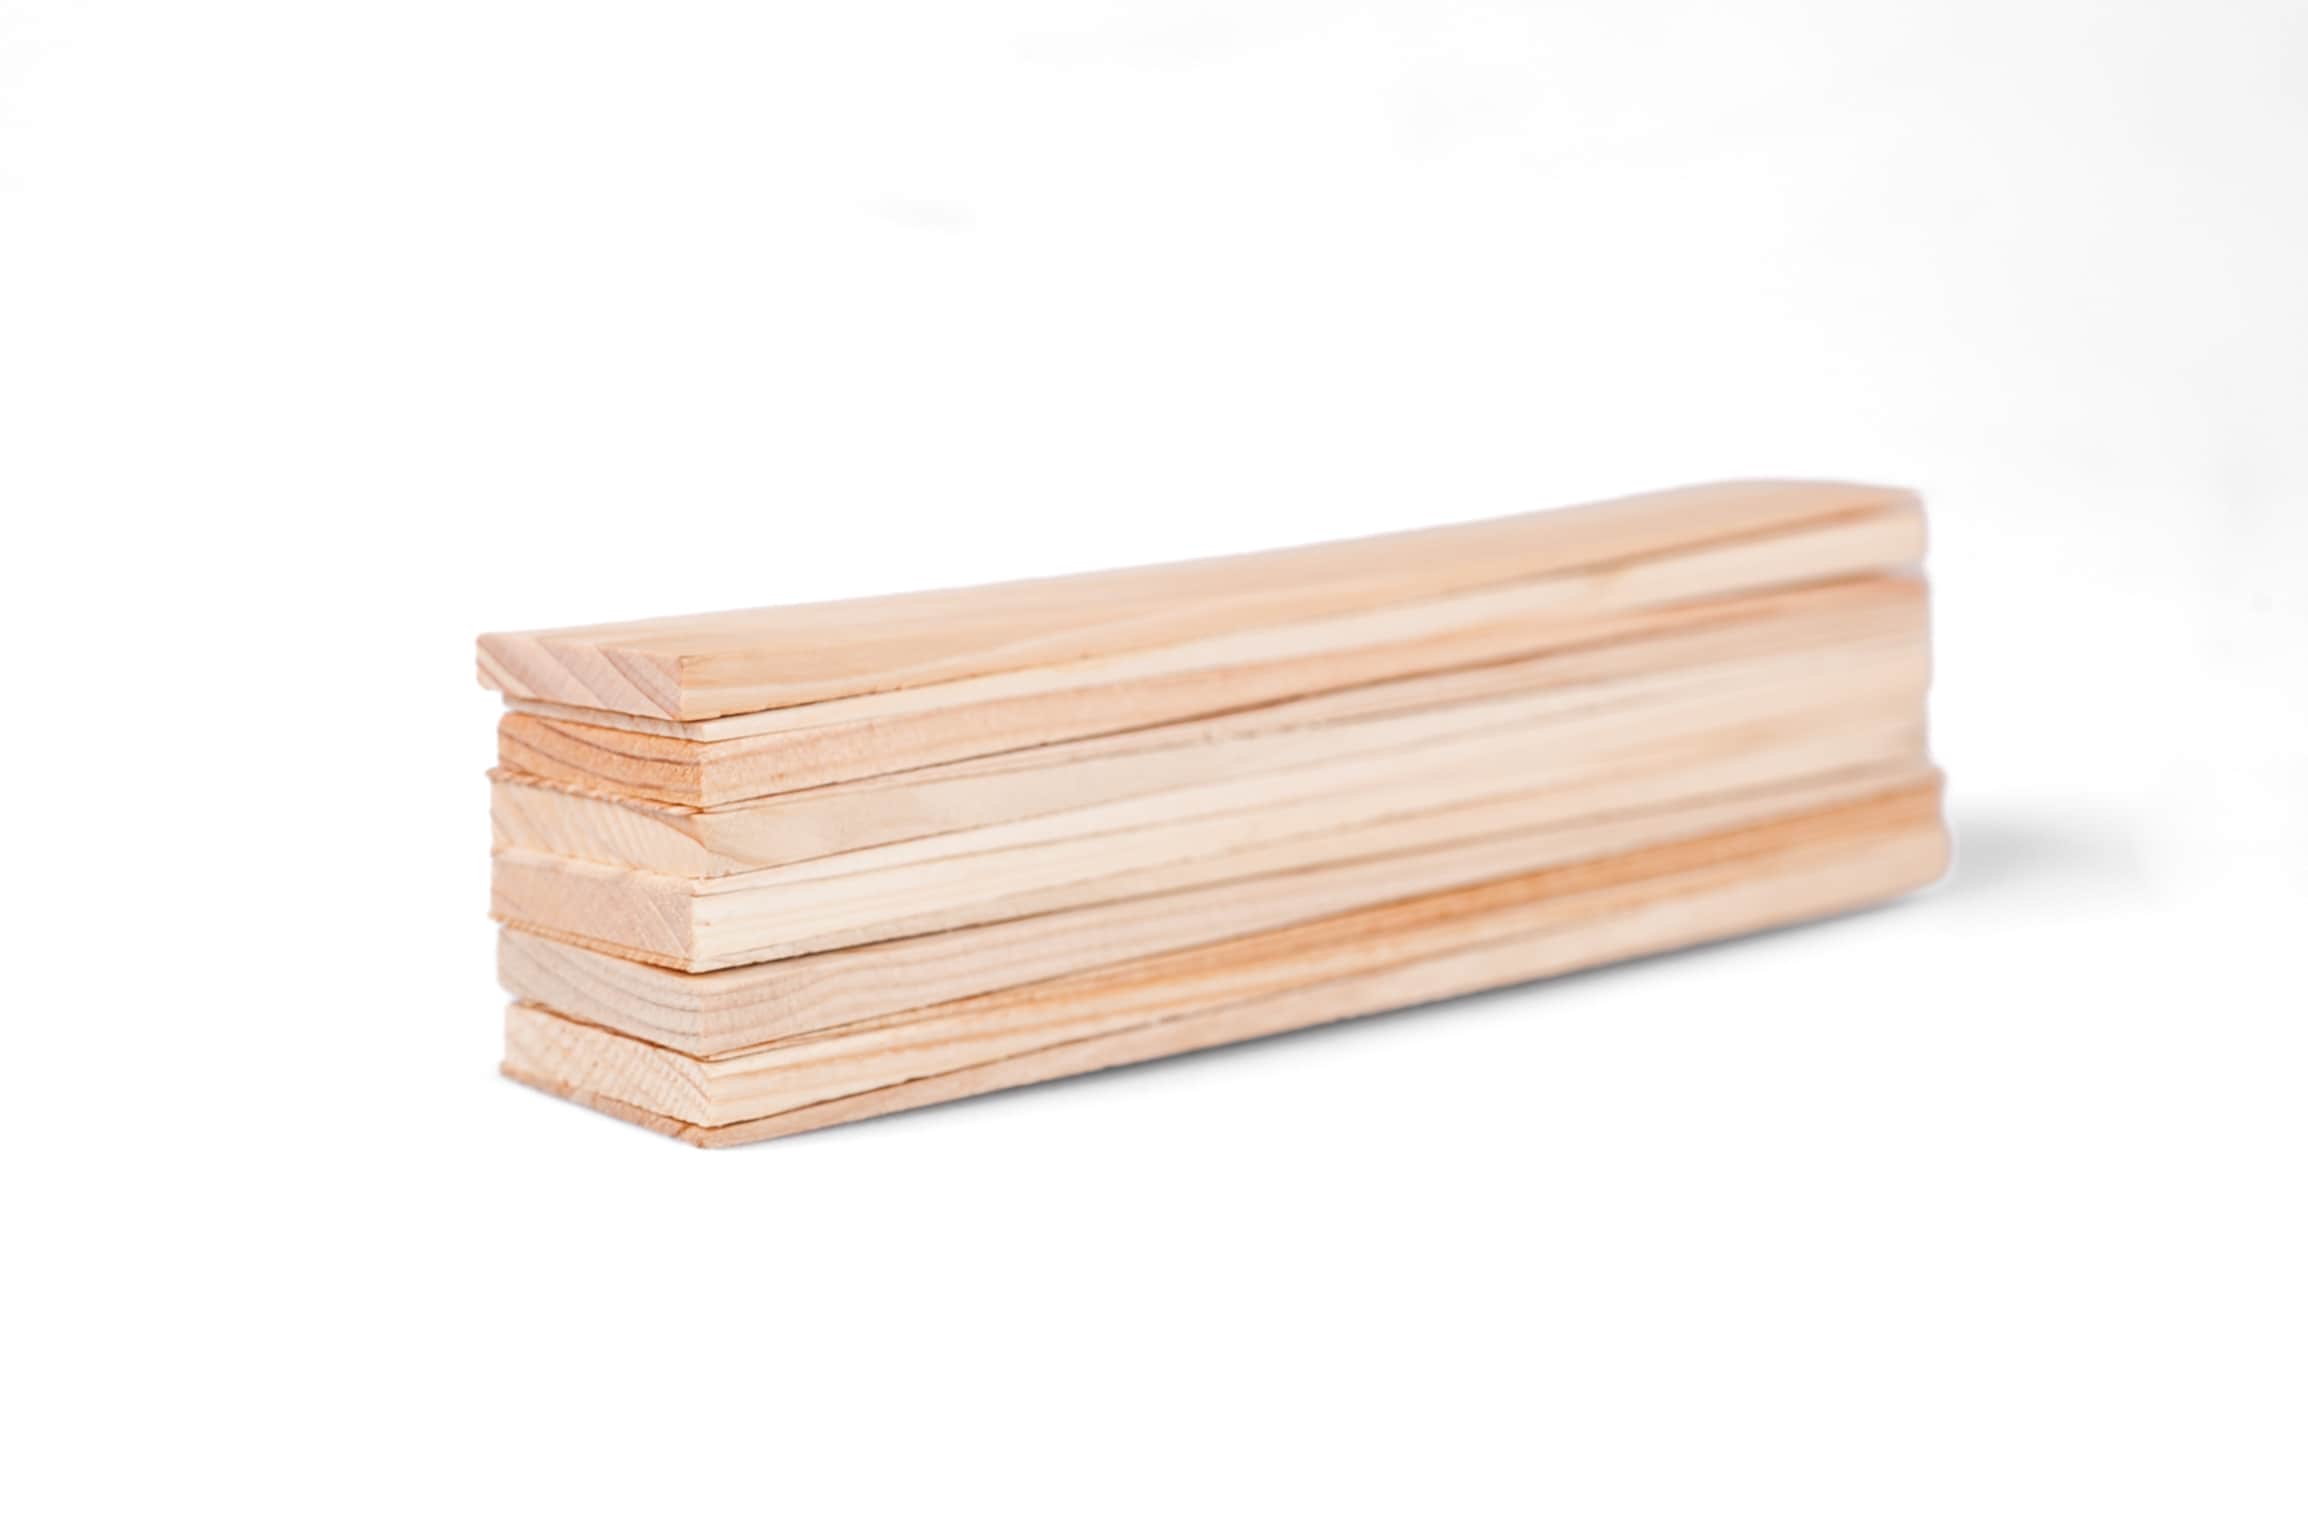 Nelson Wood Pine Shims 8 12 Pack - Kiln Dried Wood - Case of 36 (Total 432  Shim